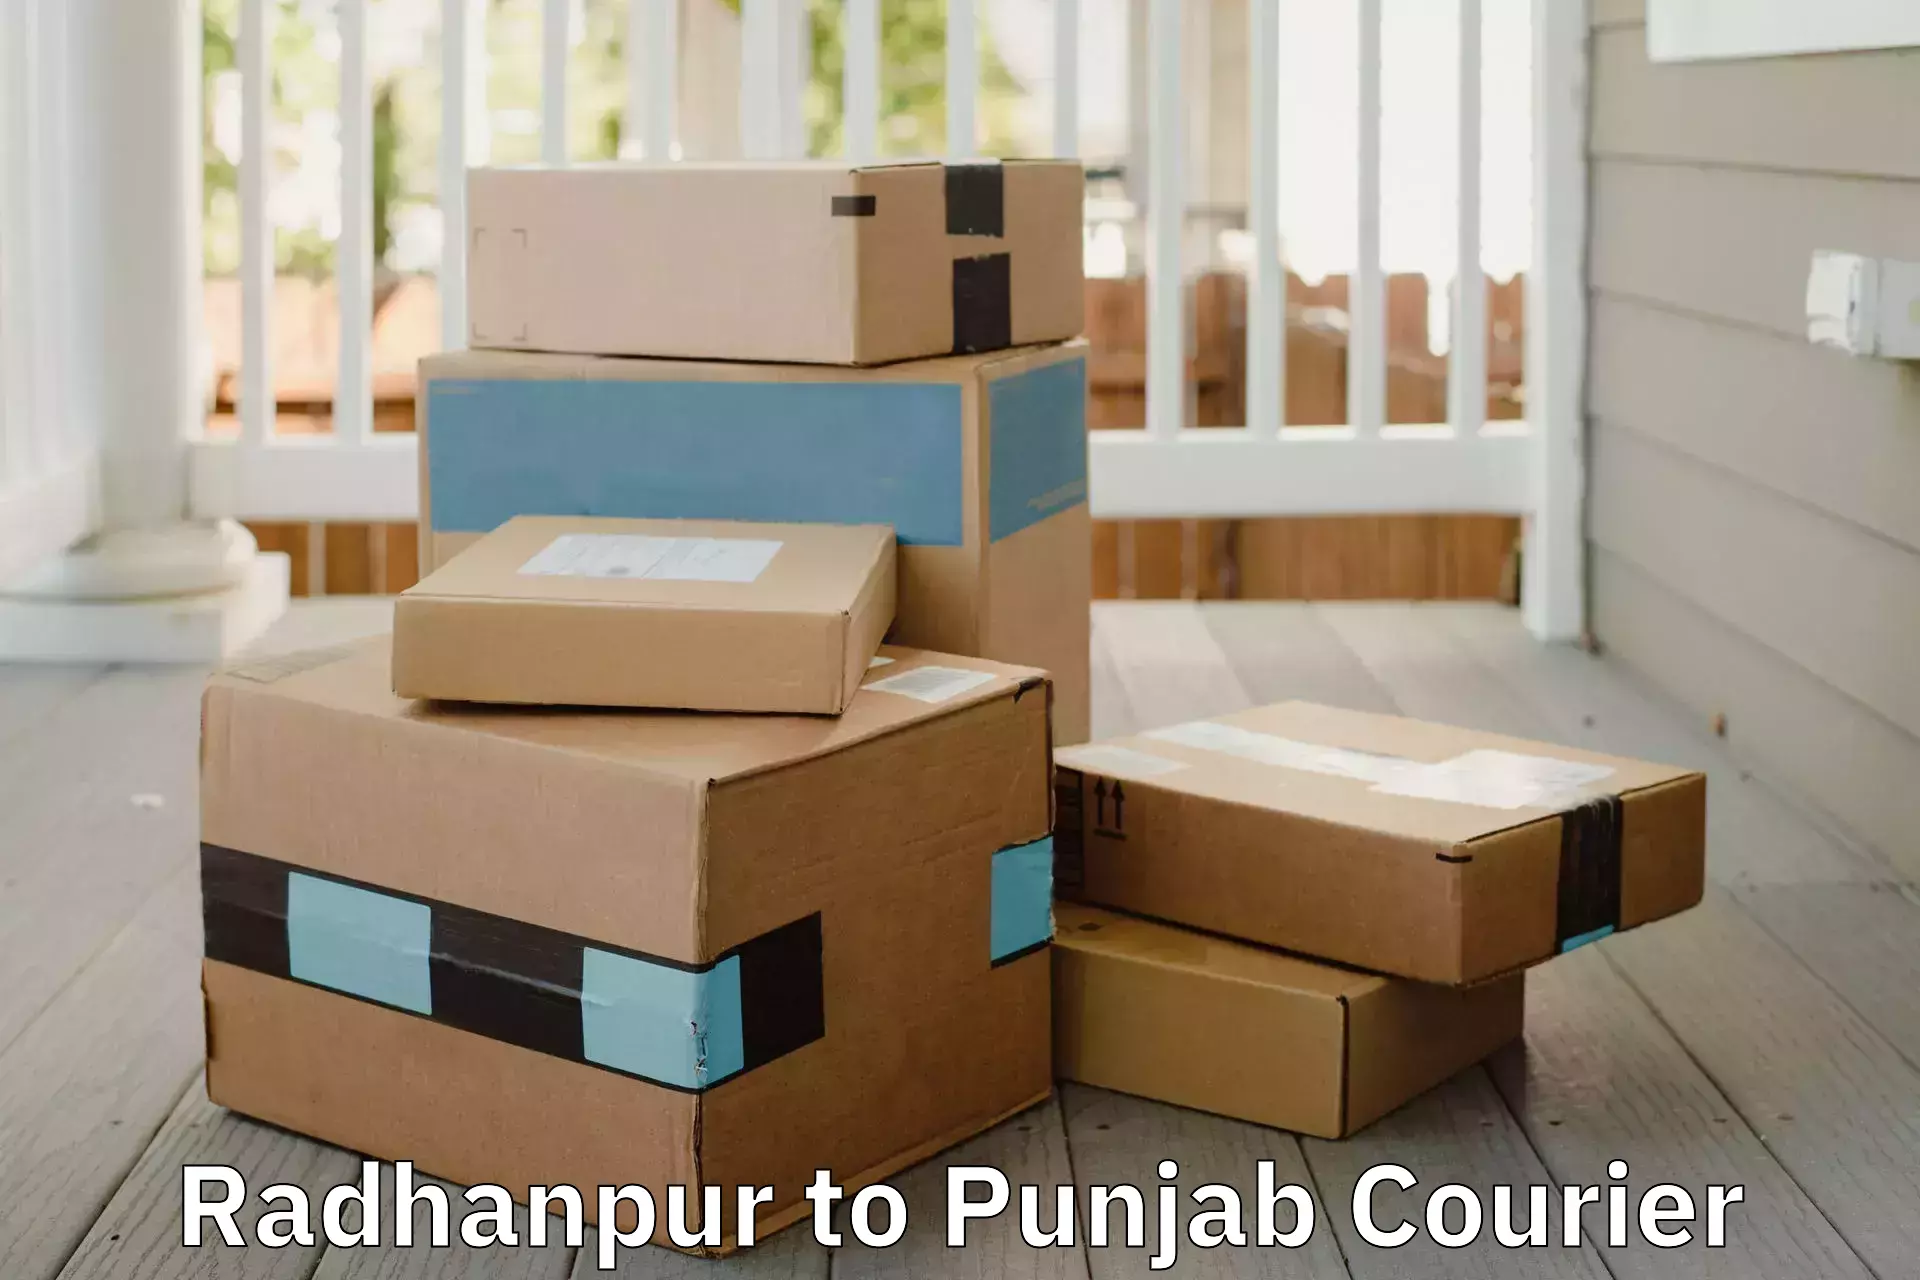 Cost-effective moving options Radhanpur to Punjab